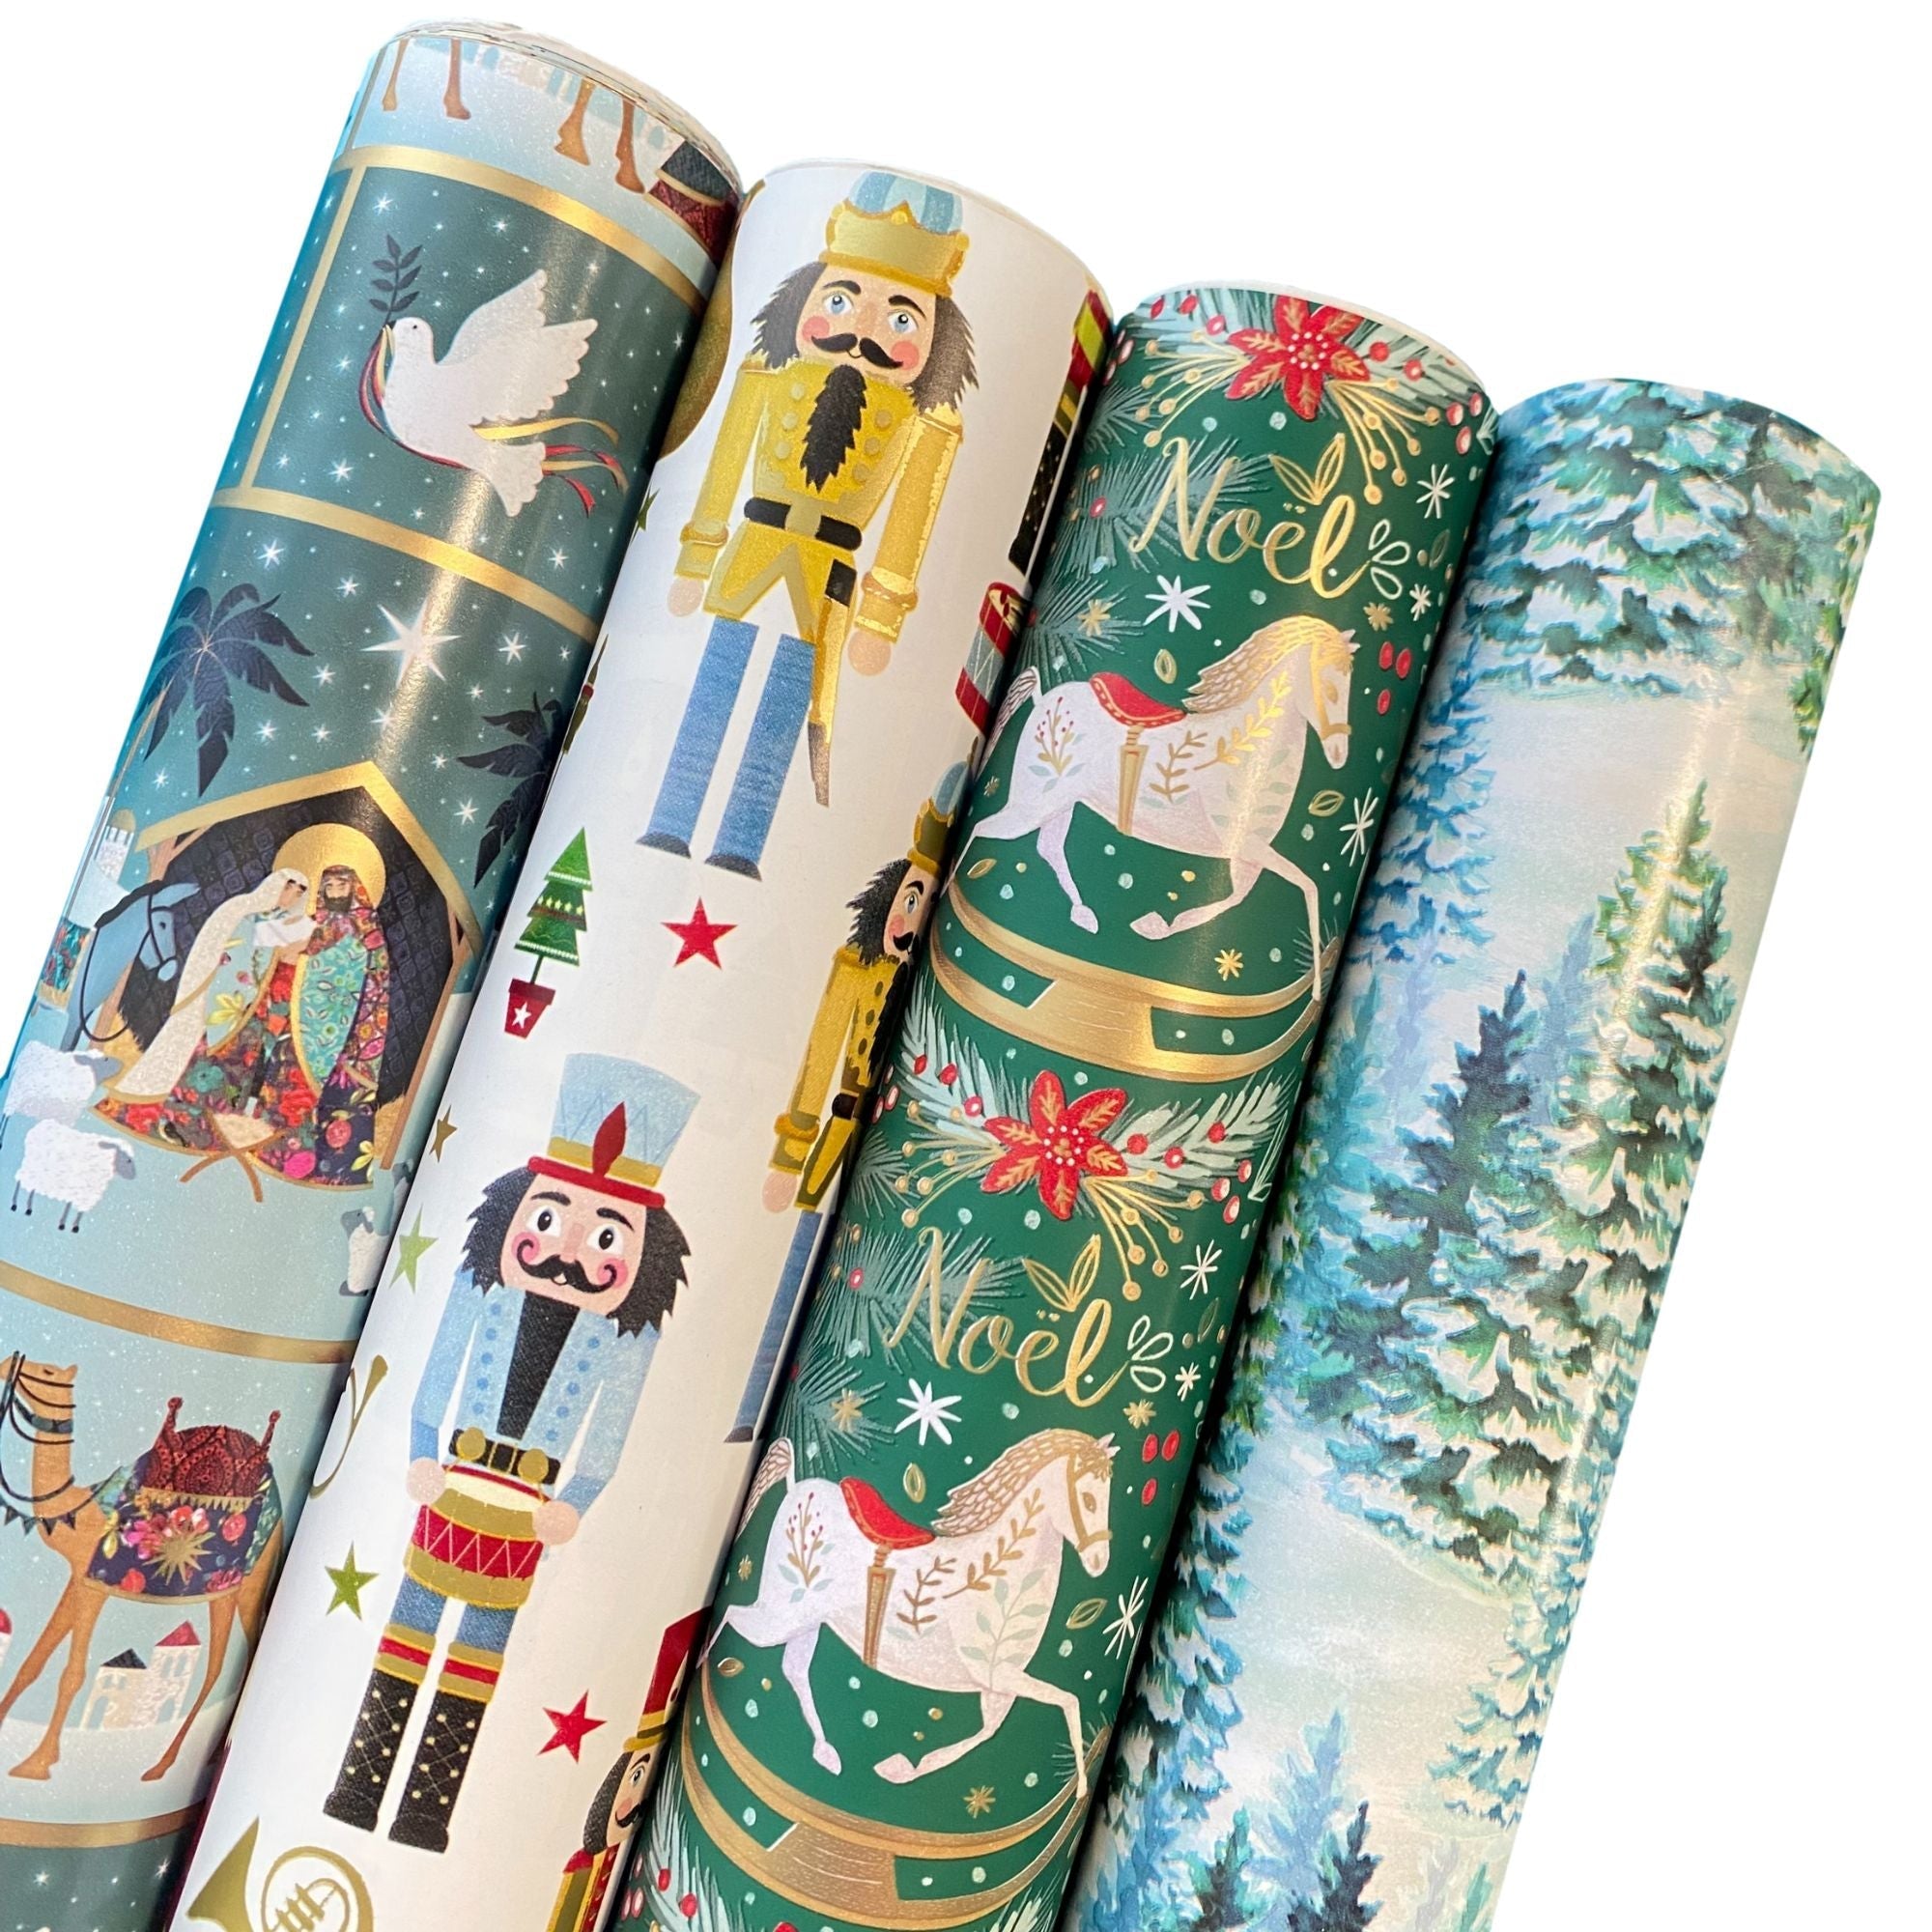 Traditional Christmas Wrapping Paper Roll Bundle (25 sq ft per roll, 100 total sq ft), 4 Pack